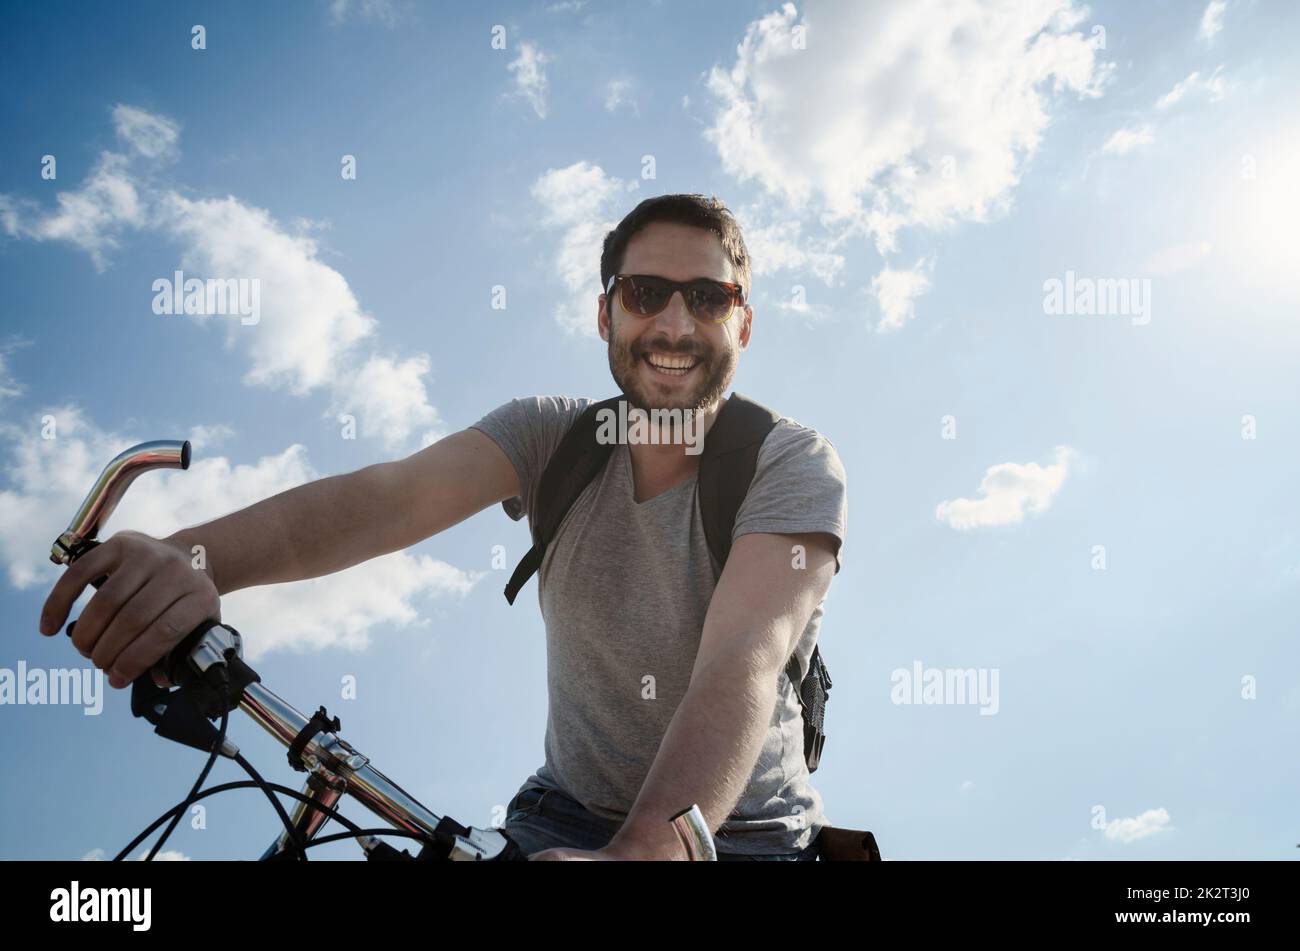 Man with bicycle Stock Photo